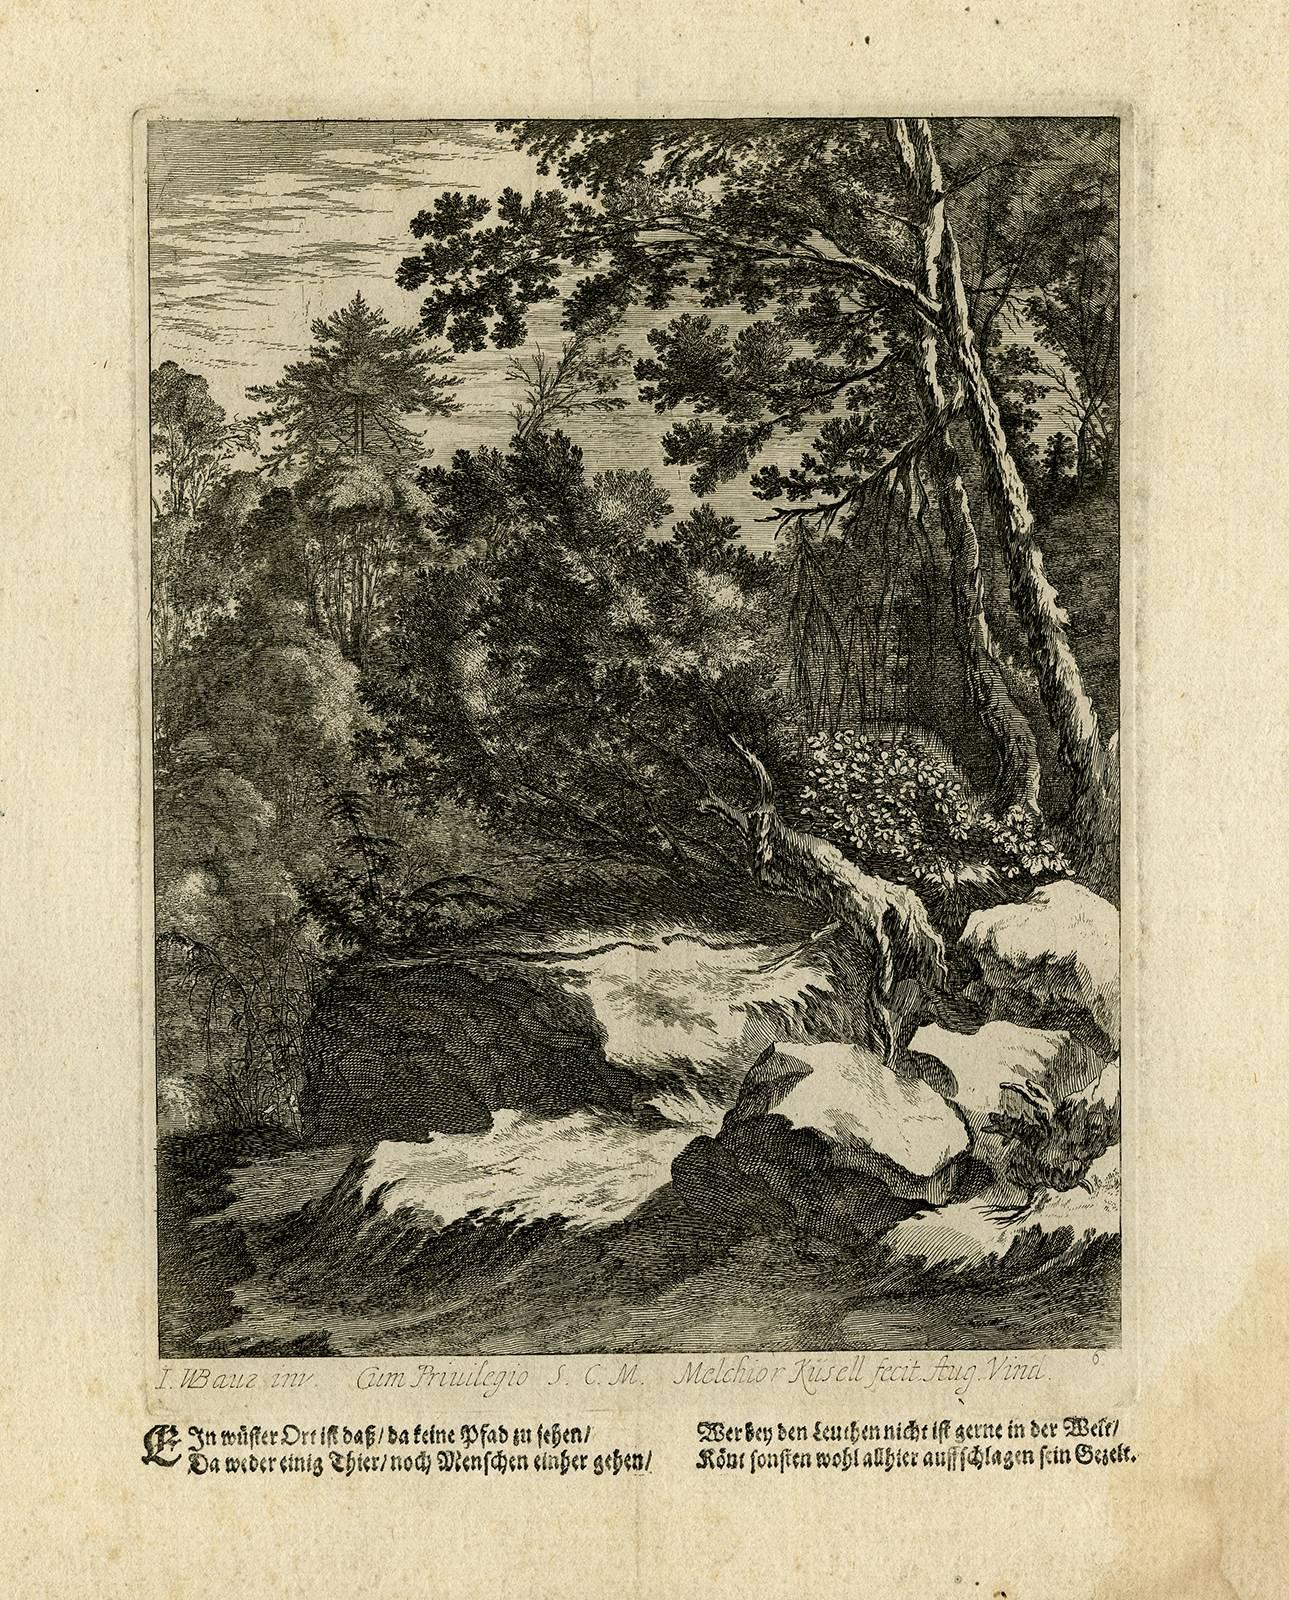 Melchior Kusell Landscape Print - Untitled - Wooded landscape with rocks.